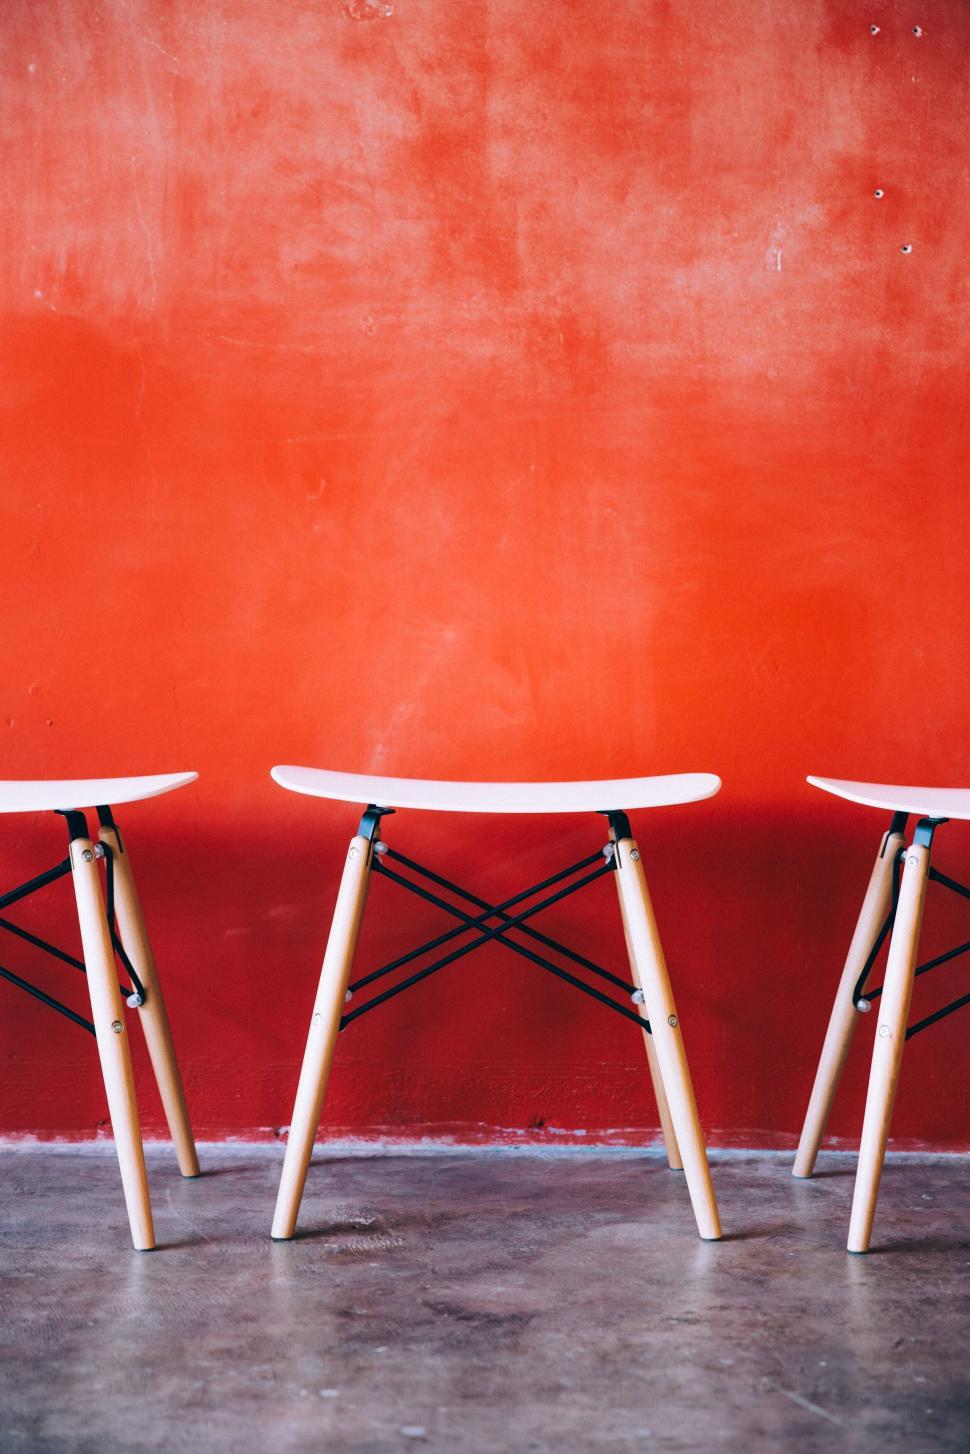 Free Image of Minimalist interior with red wall and chairs 